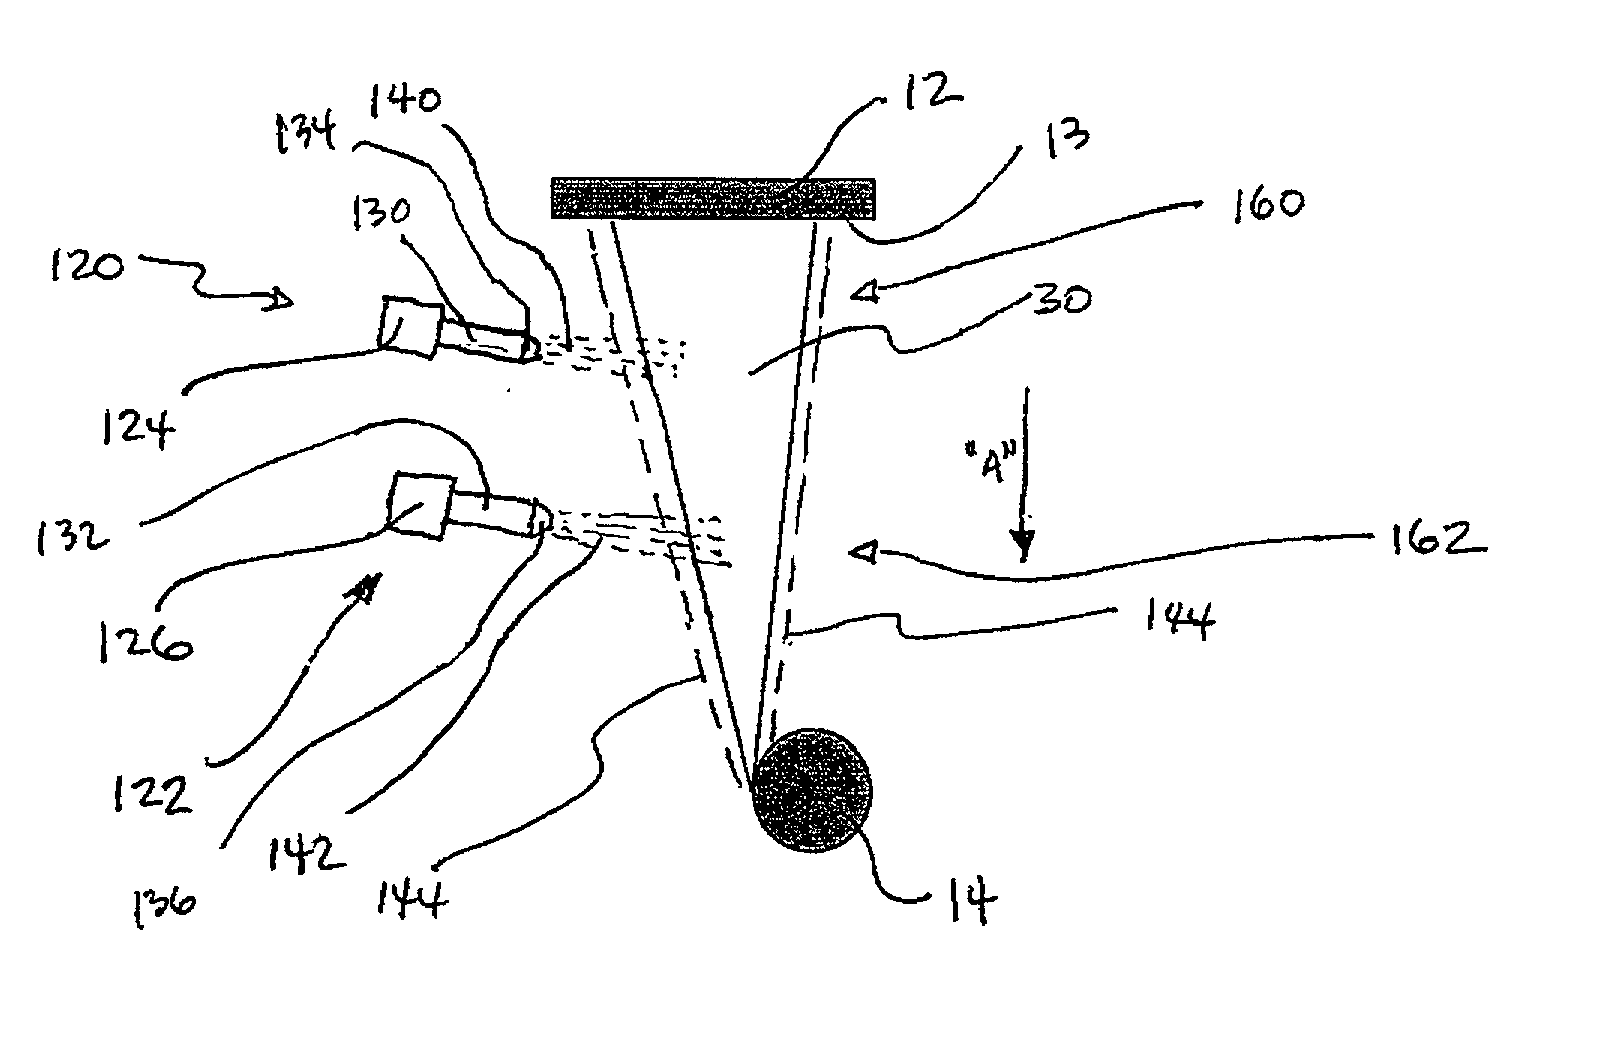 Methods and apparatus for the cooling of filaments in a filament forming process